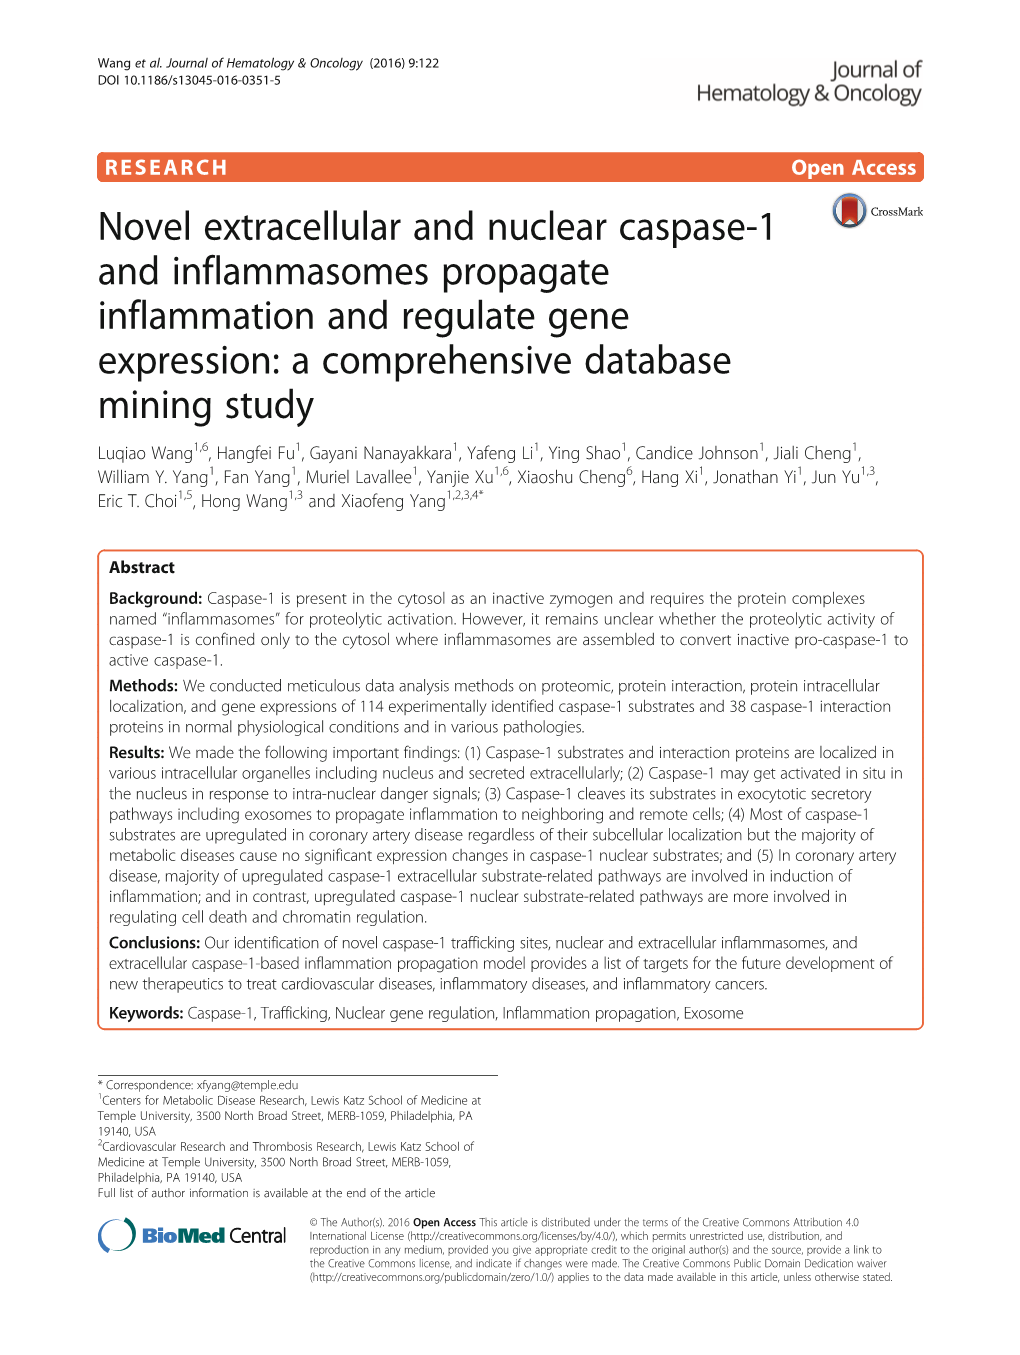 Novel Extracellular and Nuclear Caspase-1 and Inflammasomes